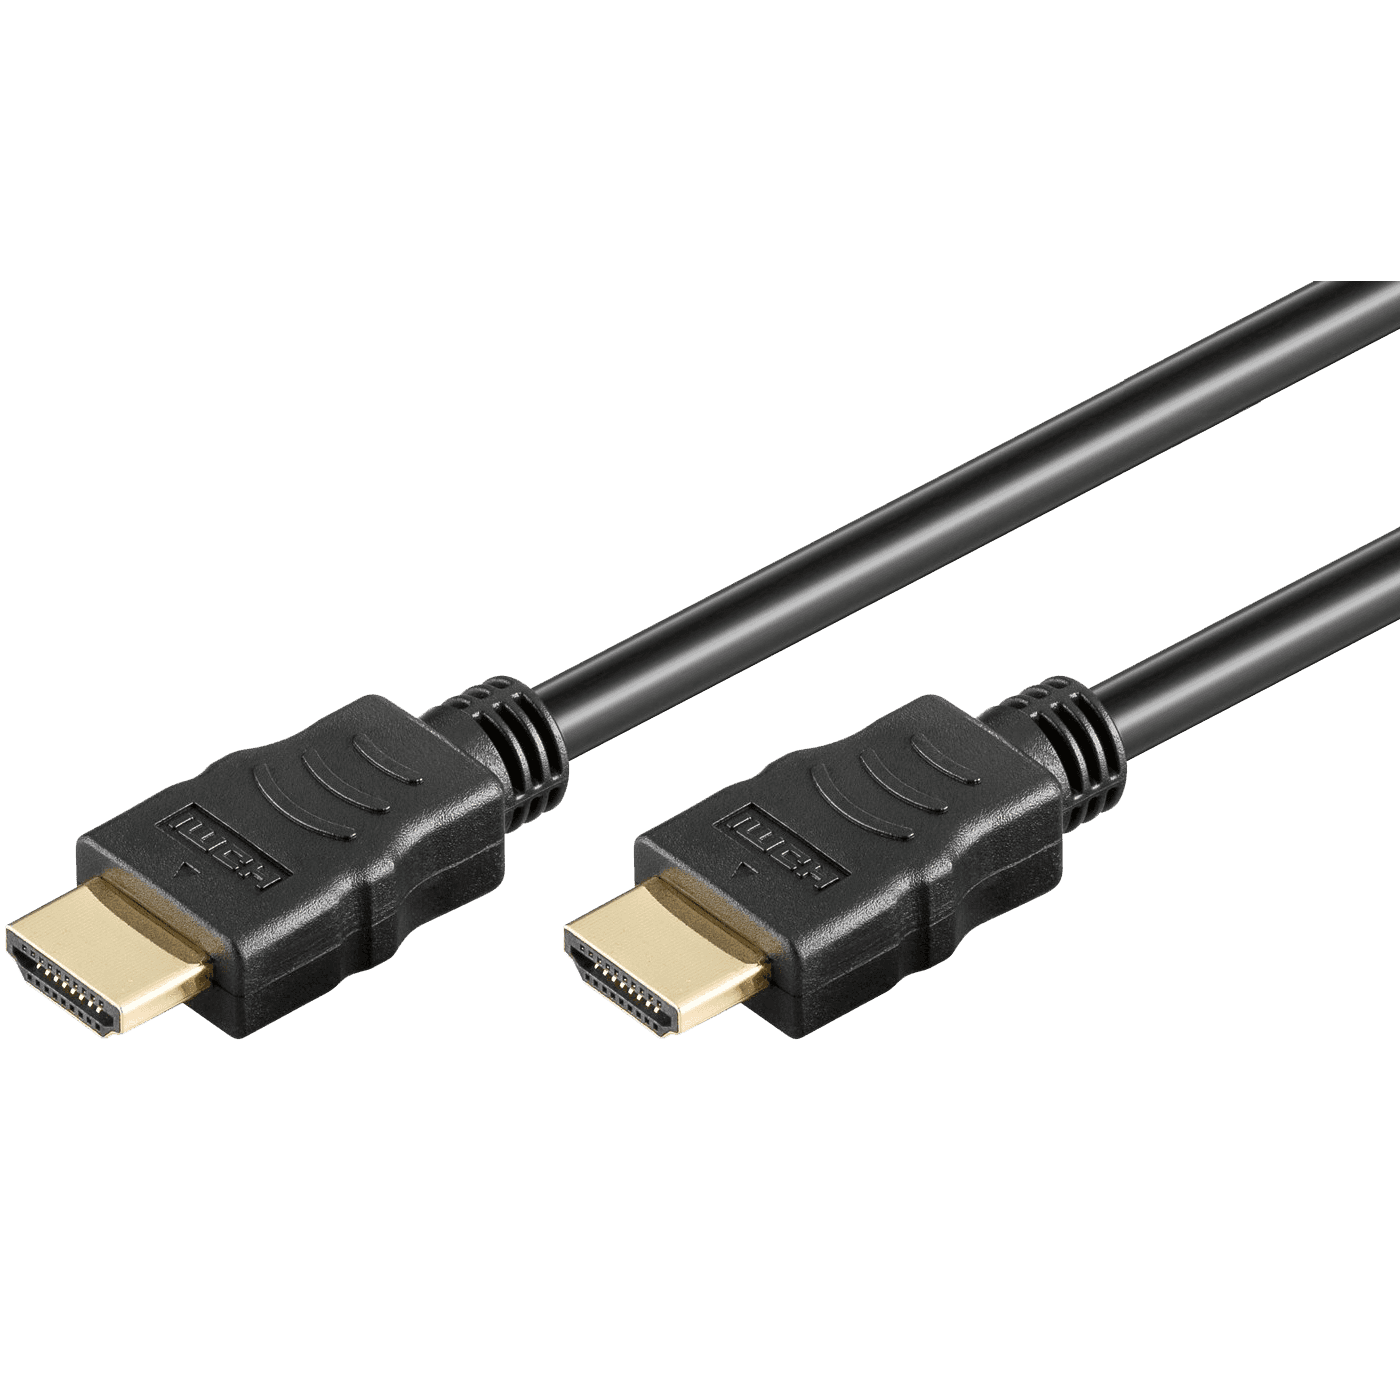 Selected image for ZED ELECTRONIC HDMI 2.1 kabl 4K/120p ili 8K/60p 48 Gbps 1.5m